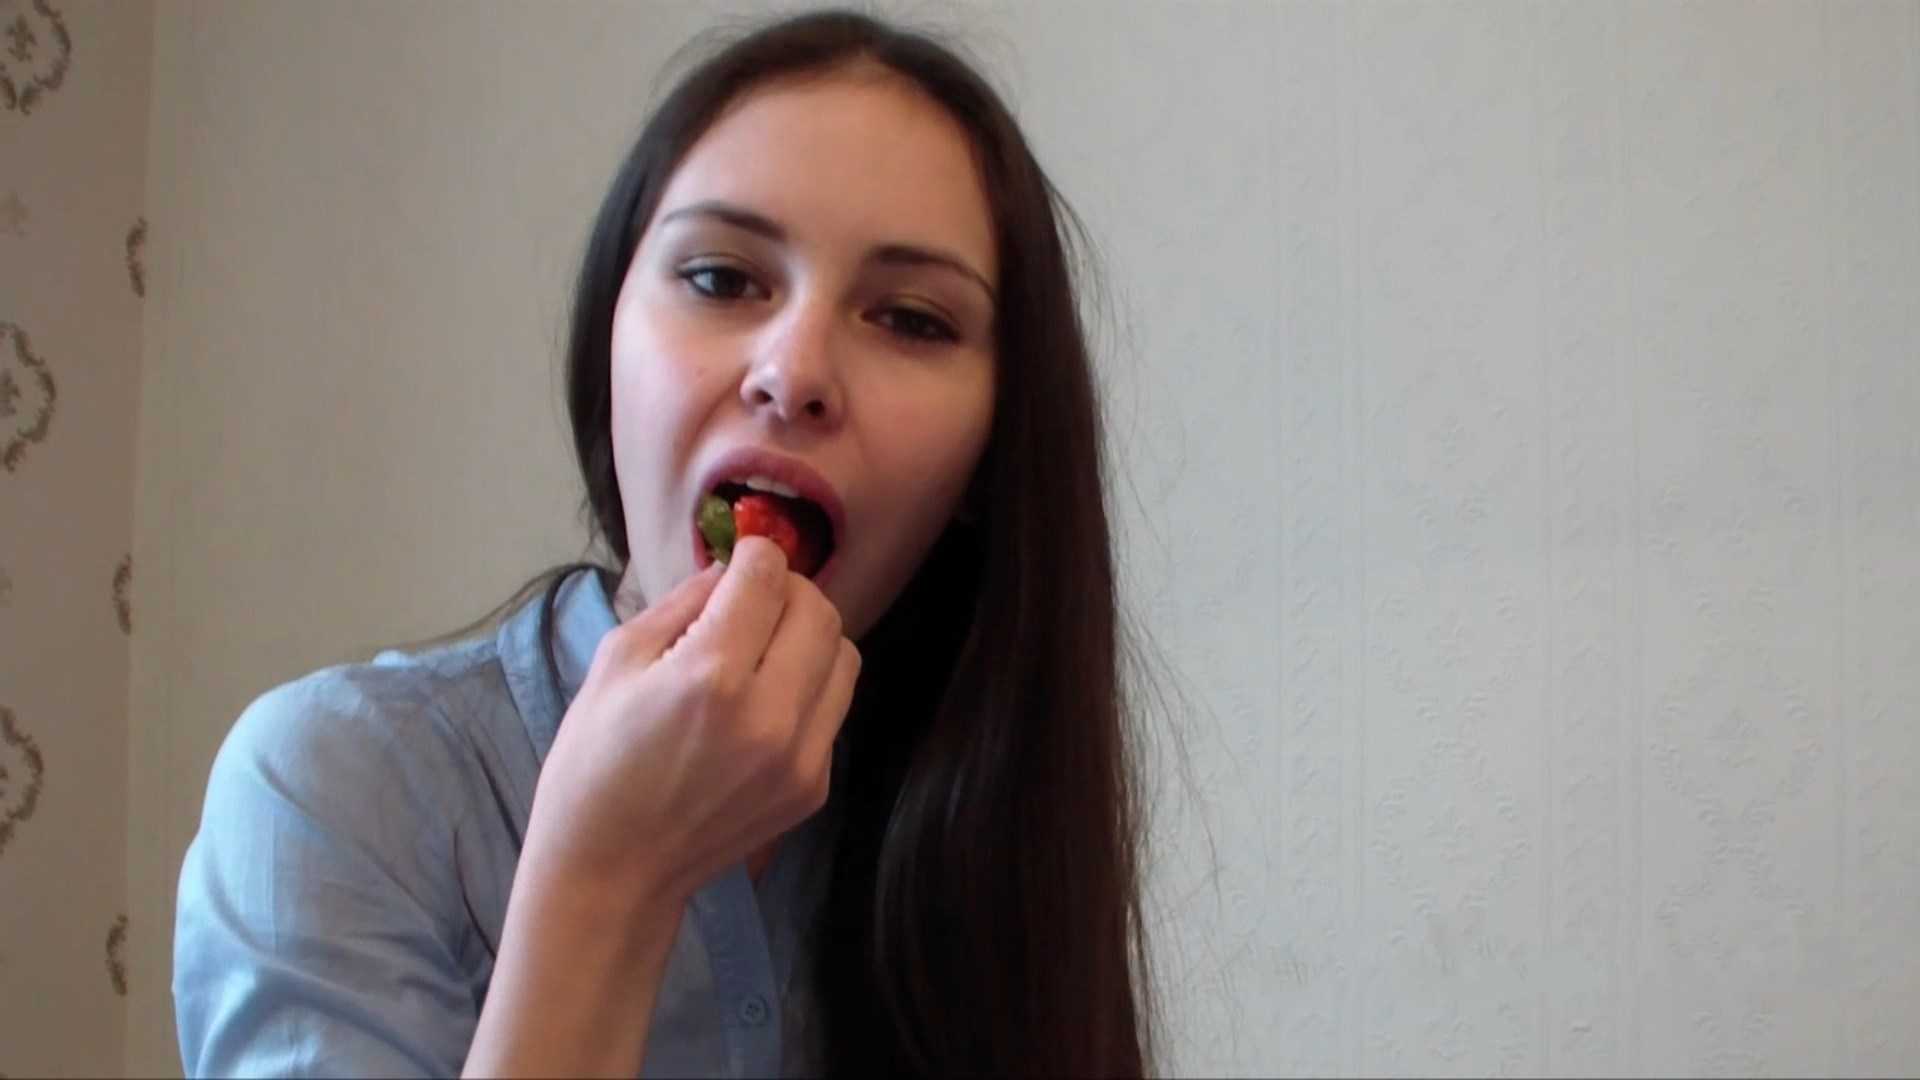 Alina eats strawberries and pooping in mouth toilet slave – PooAlina | Full HD 1080p | May 9, 2017